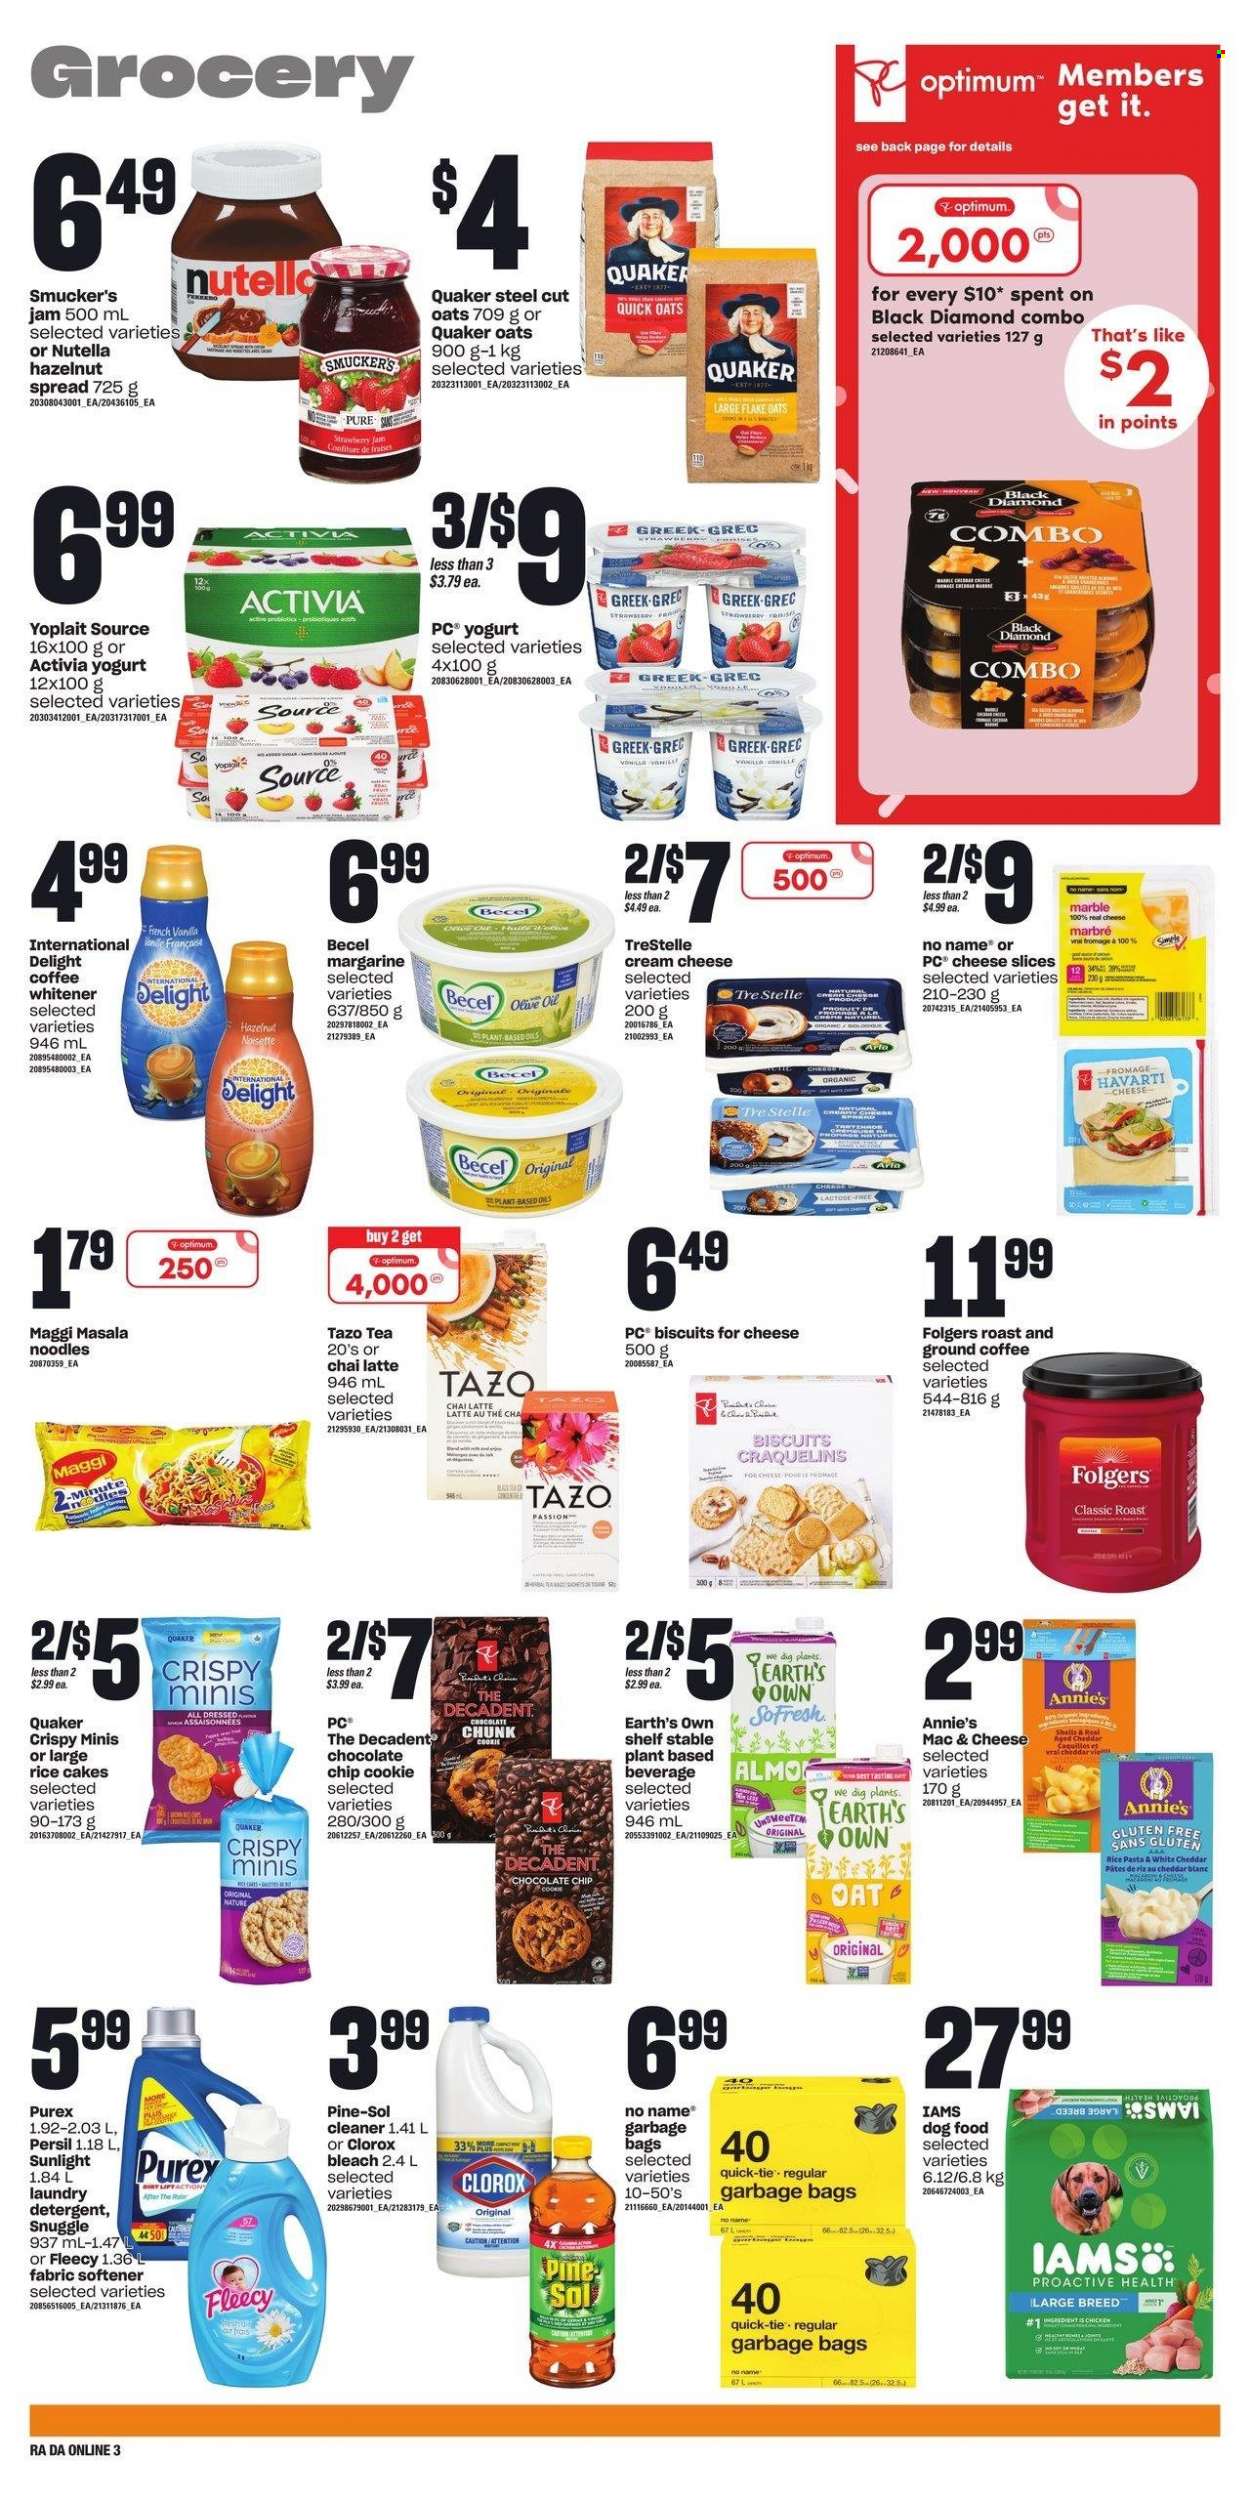 thumbnail - Atlantic Superstore Flyer - January 26, 2023 - February 01, 2023 - Sales products - No Name, pasta, Quaker, noodles, Annie's, cream cheese, sliced cheese, Havarti, yoghurt, Activia, Yoplait, margarine, biscuit, oats, Maggi, strawberry jam, Quick Oats, olive oil, fruit jam, hazelnut spread, tea, Folgers, ground coffee, cleaner, bleach, Clorox, Pine-Sol, Snuggle, Persil, fabric softener, Sunlight, Purex, bag, animal food, dog food, Optimum, Iams, detergent, Nutella. Page 11.